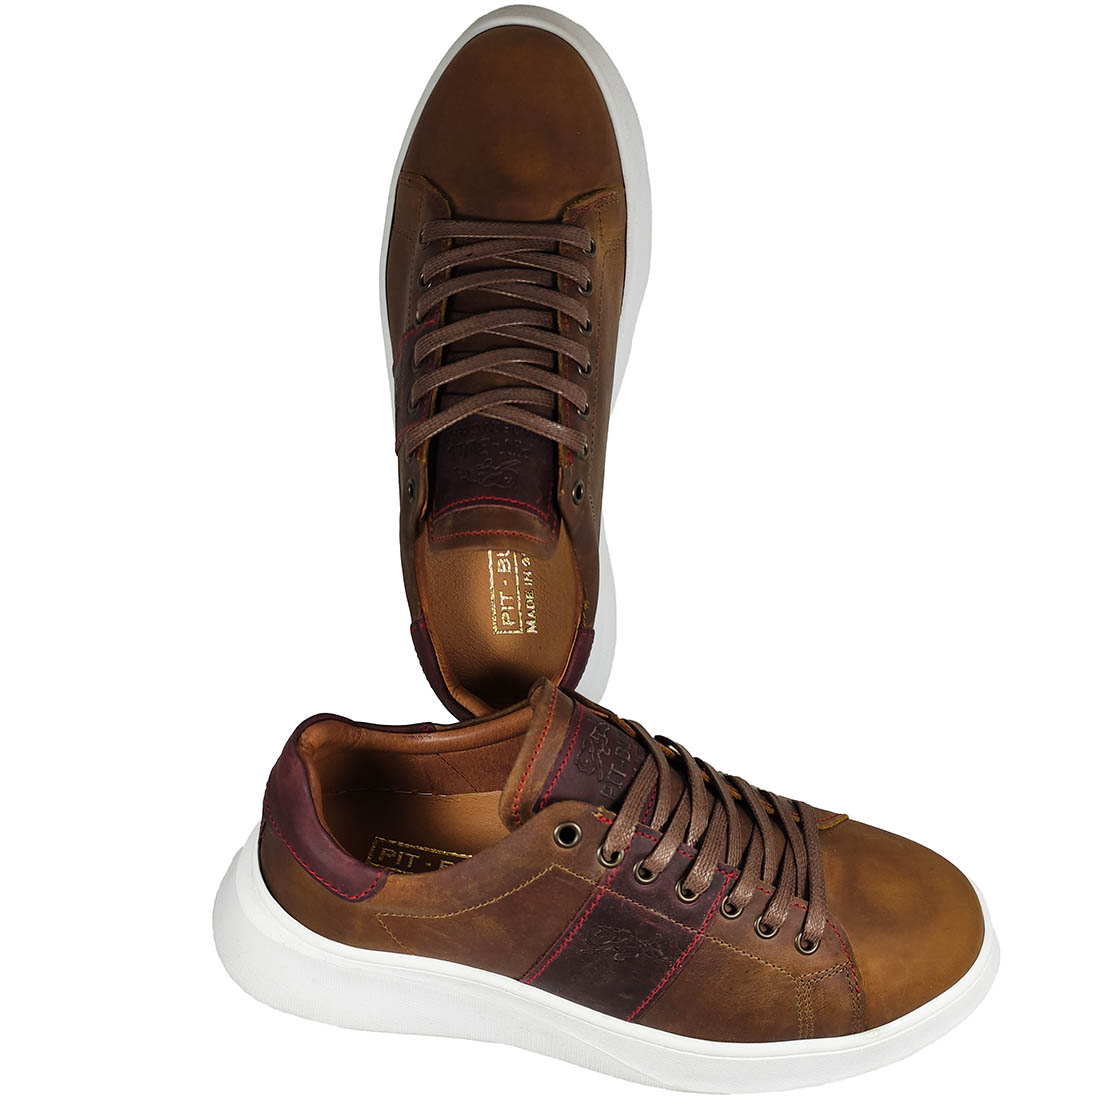 Leather Mens Casual Shoes Pit-Bull 41823-1 Brown